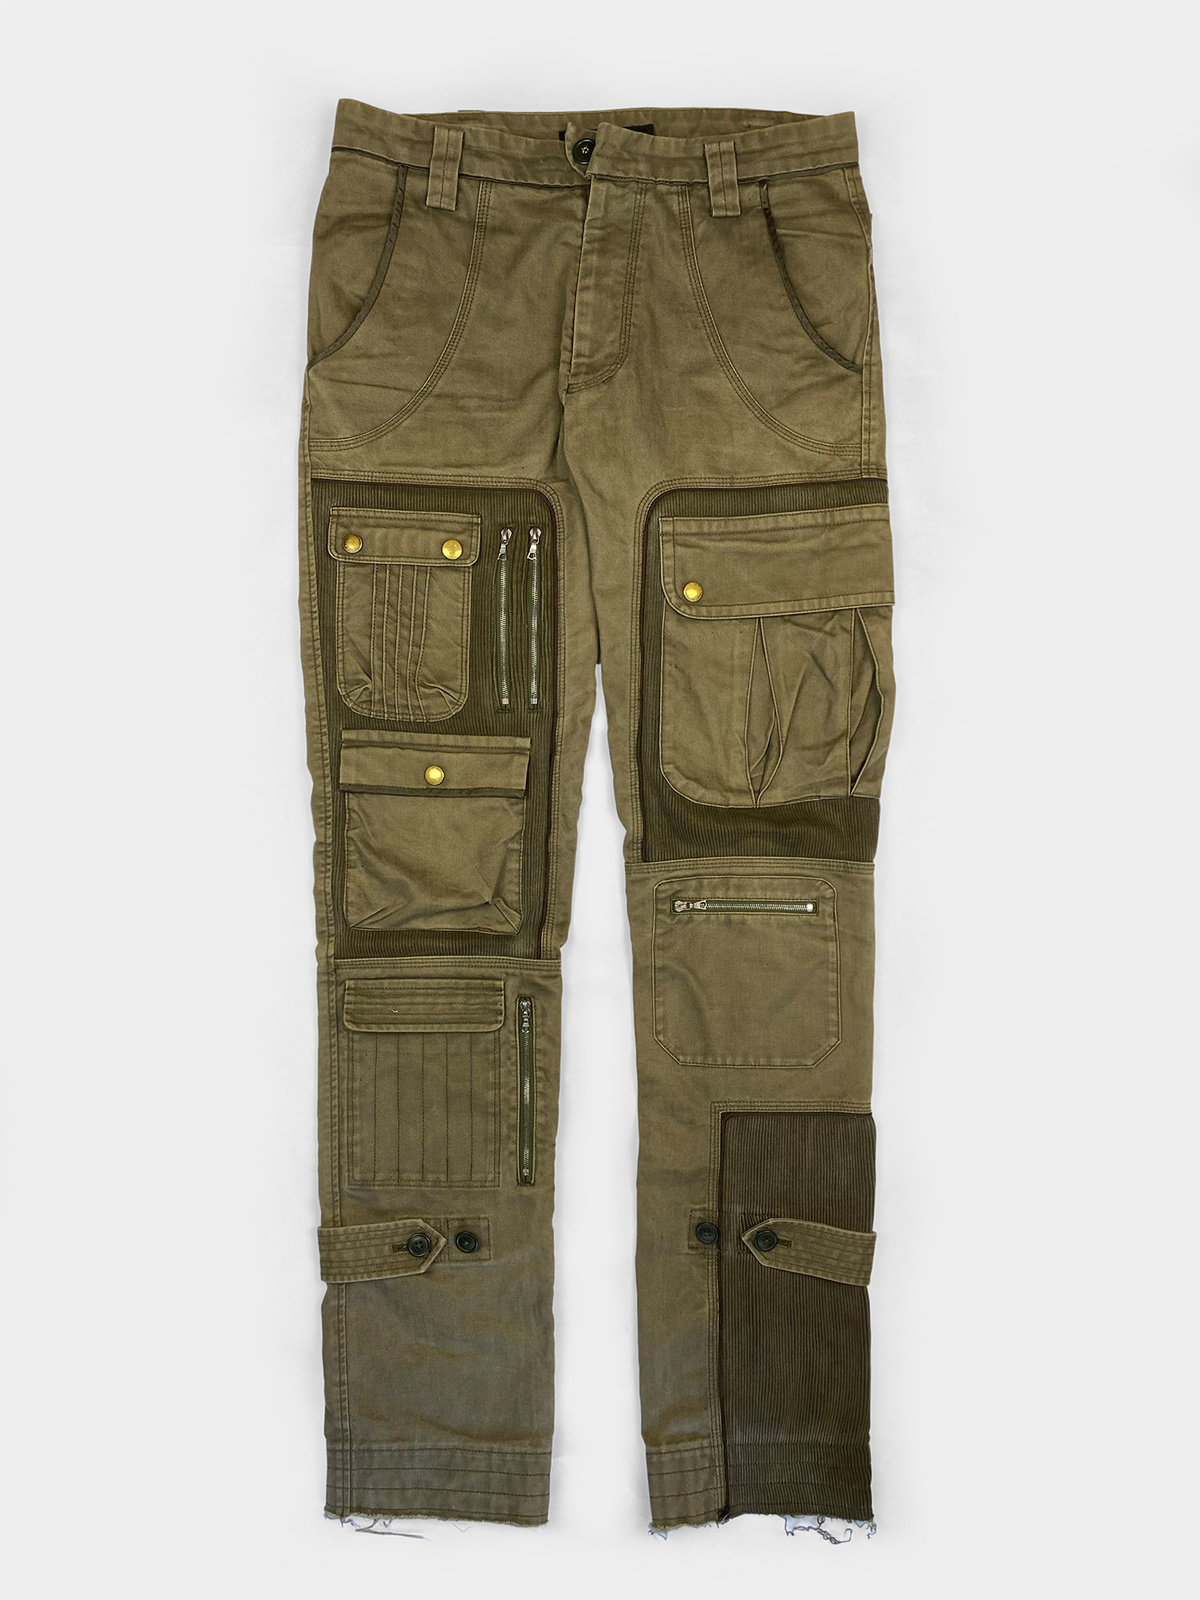 UNDERCOVER A/W04 Cargo Pants - ARCHIVED